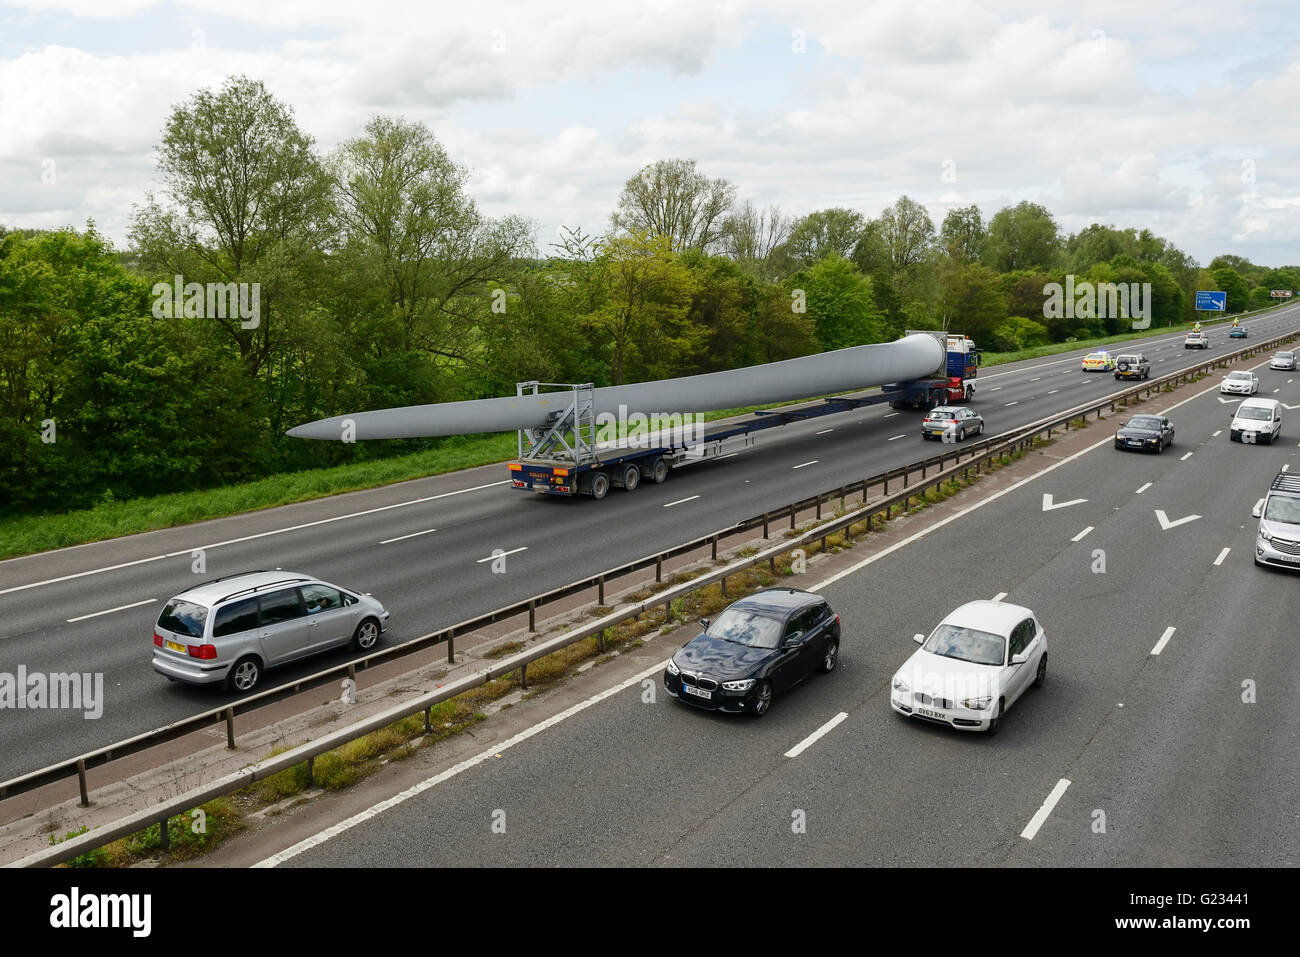 Helsby, Cheshire, UK. 23rd May 2016. A 45 metre long wind turbine blade being transported under police escort. The vehicle has travelled from the Port of Liverpool and is approaching junction 14 of the M56 motorway where it will exit to the Frodsham Wind Farm project currently under construction. Andrew Paterson/Alamy Live News Stock Photo